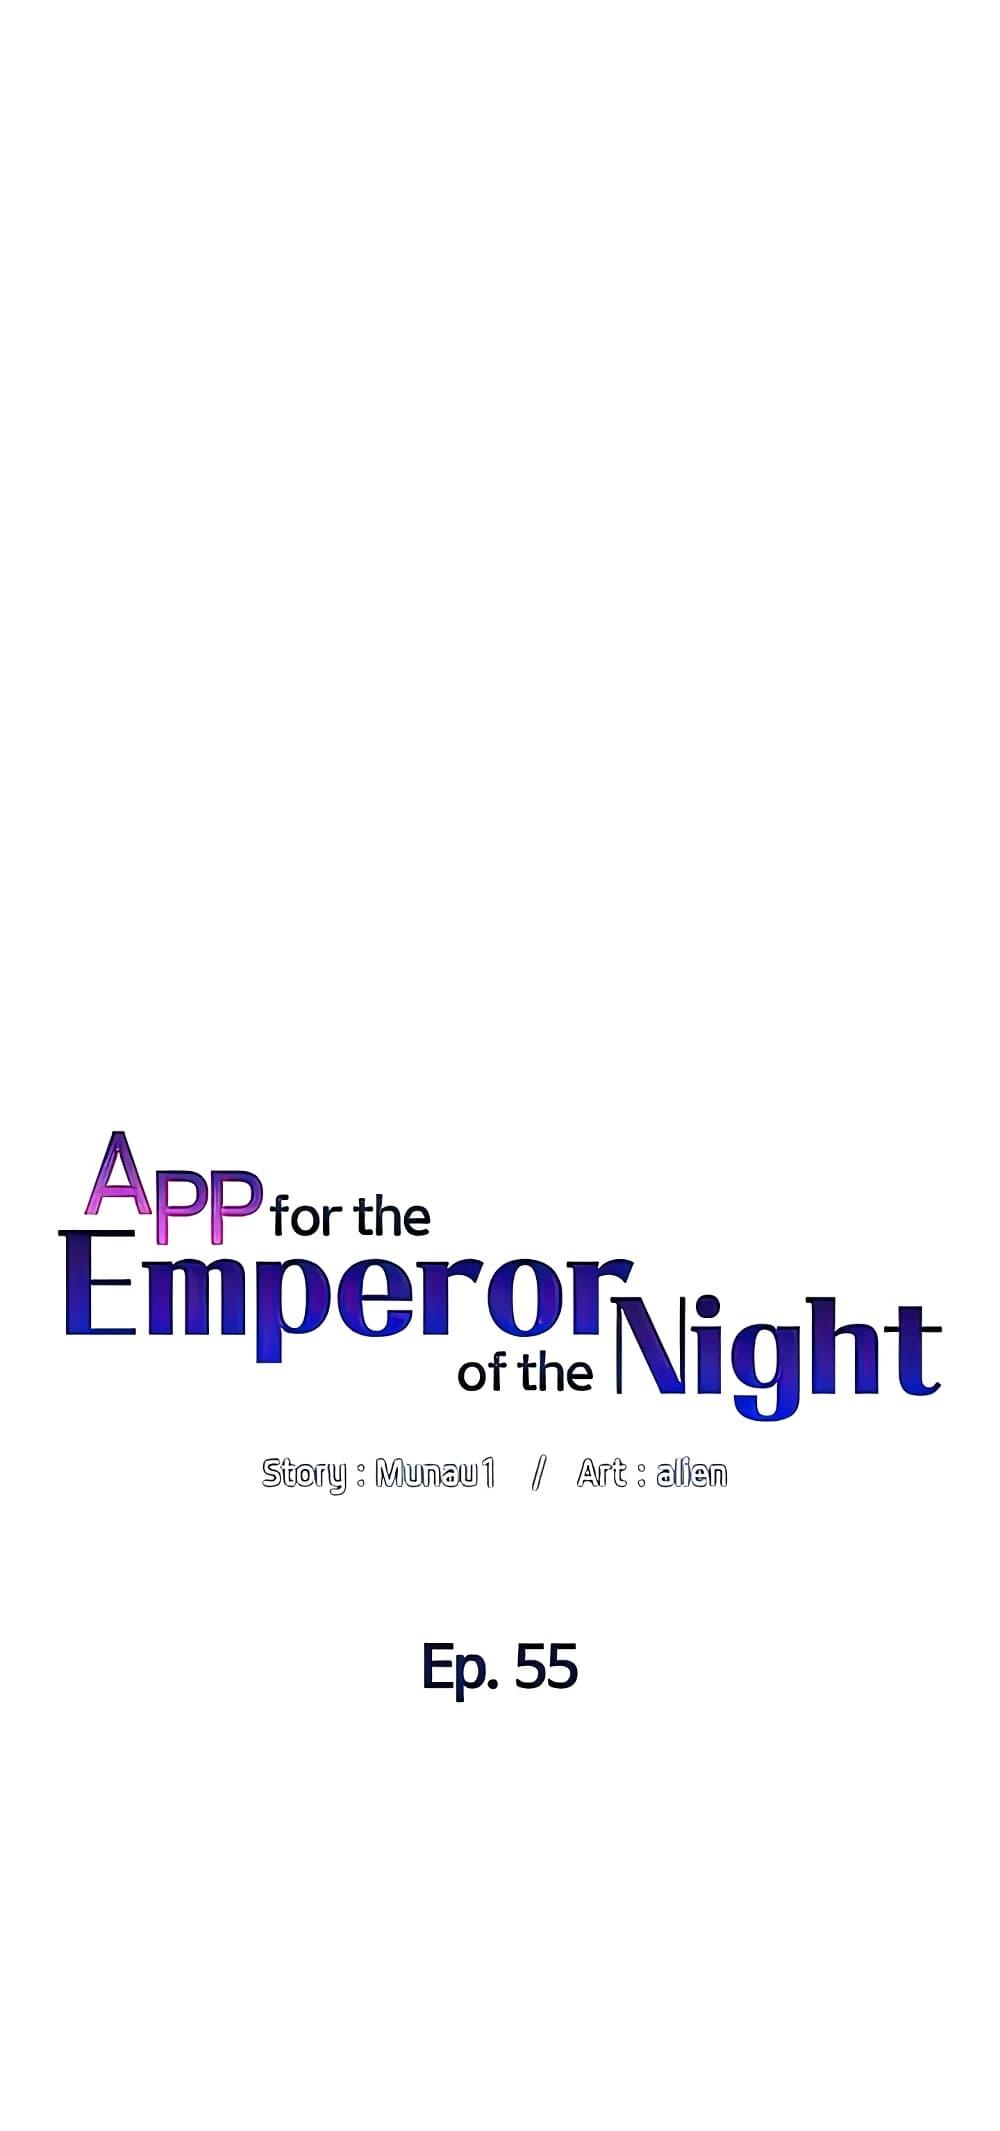 APP for the Emperor of the Night 55 09